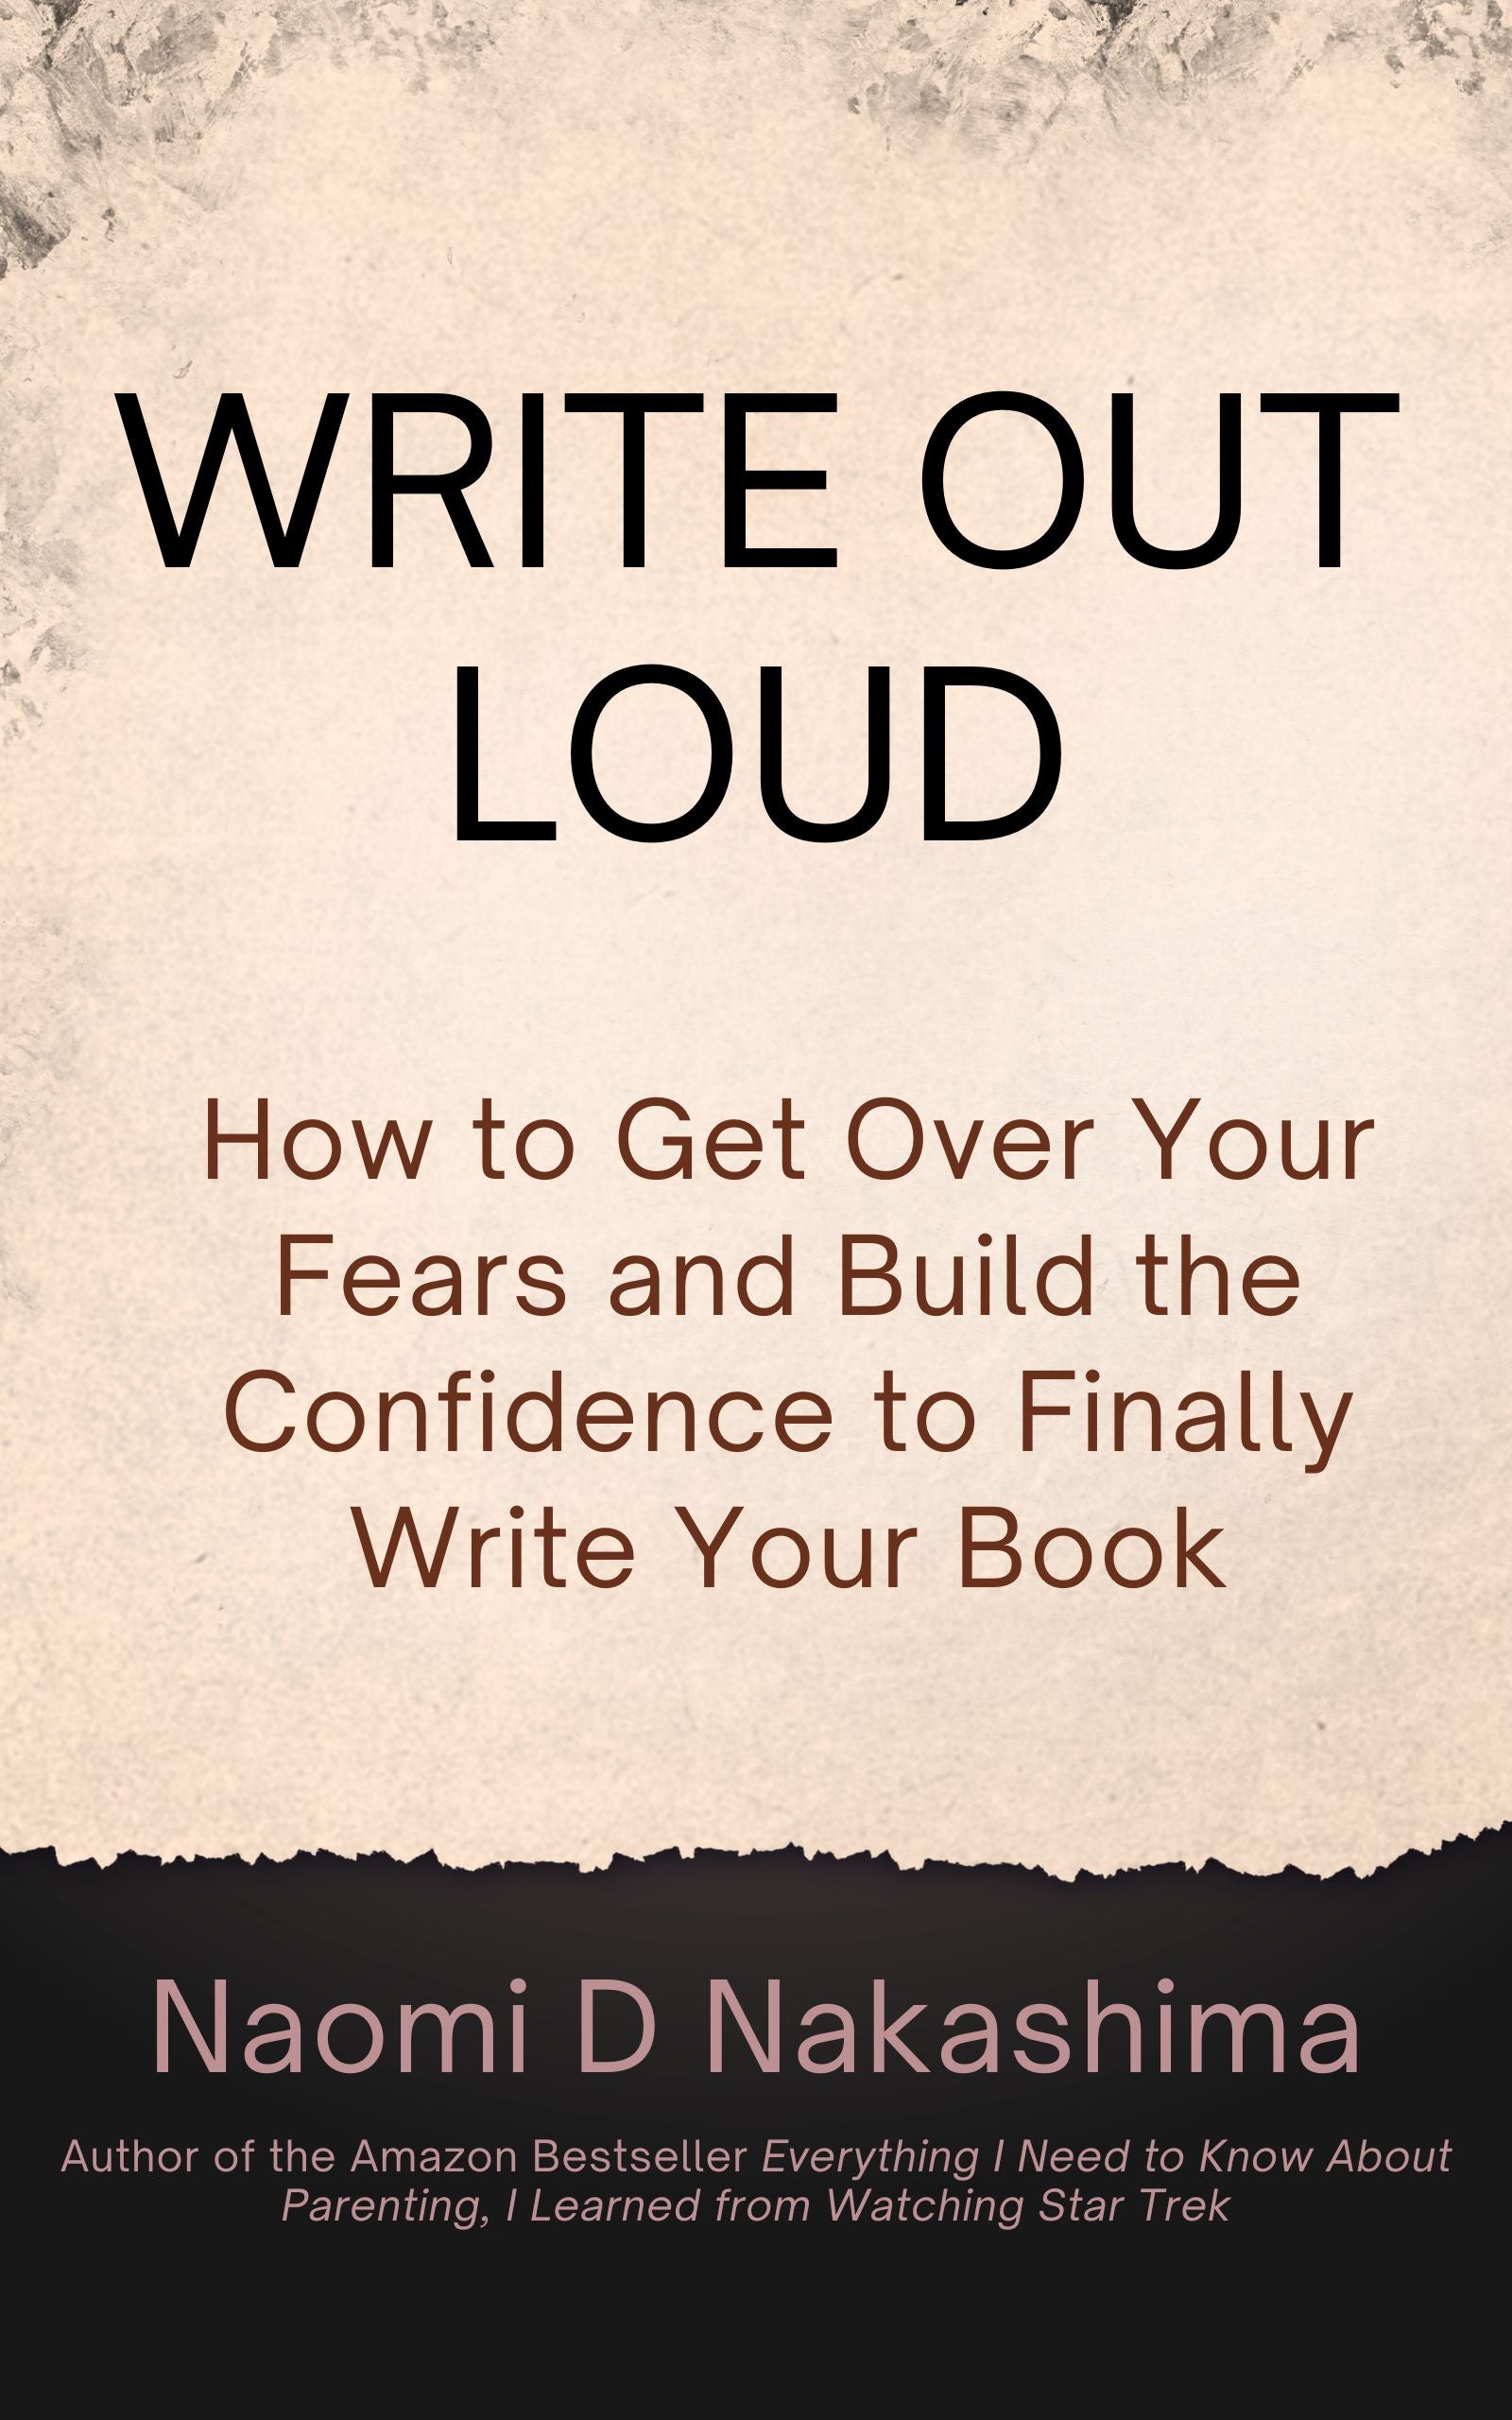 Discover how to overcome your fears and gain the confidence you need to write your book with the assistance of writing planners designed specifically for authors and writers.